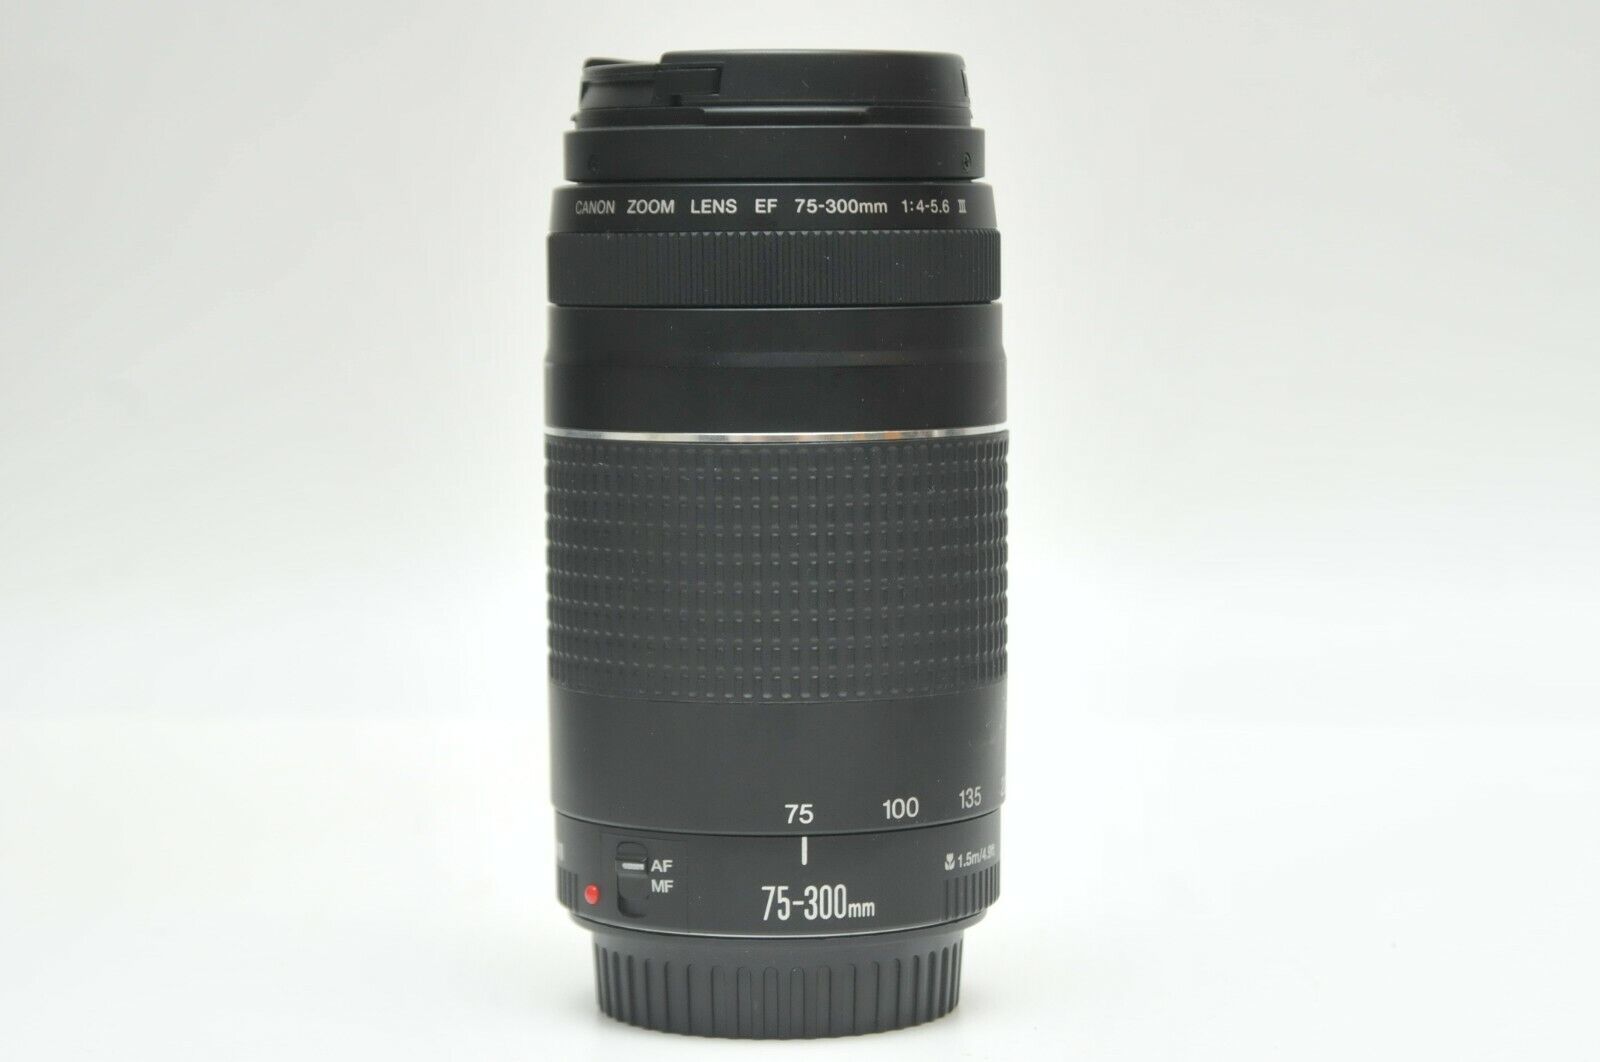 Canon Zoom EF 75-300mm f/4.0-5.6 III Lens For Canon Rebel